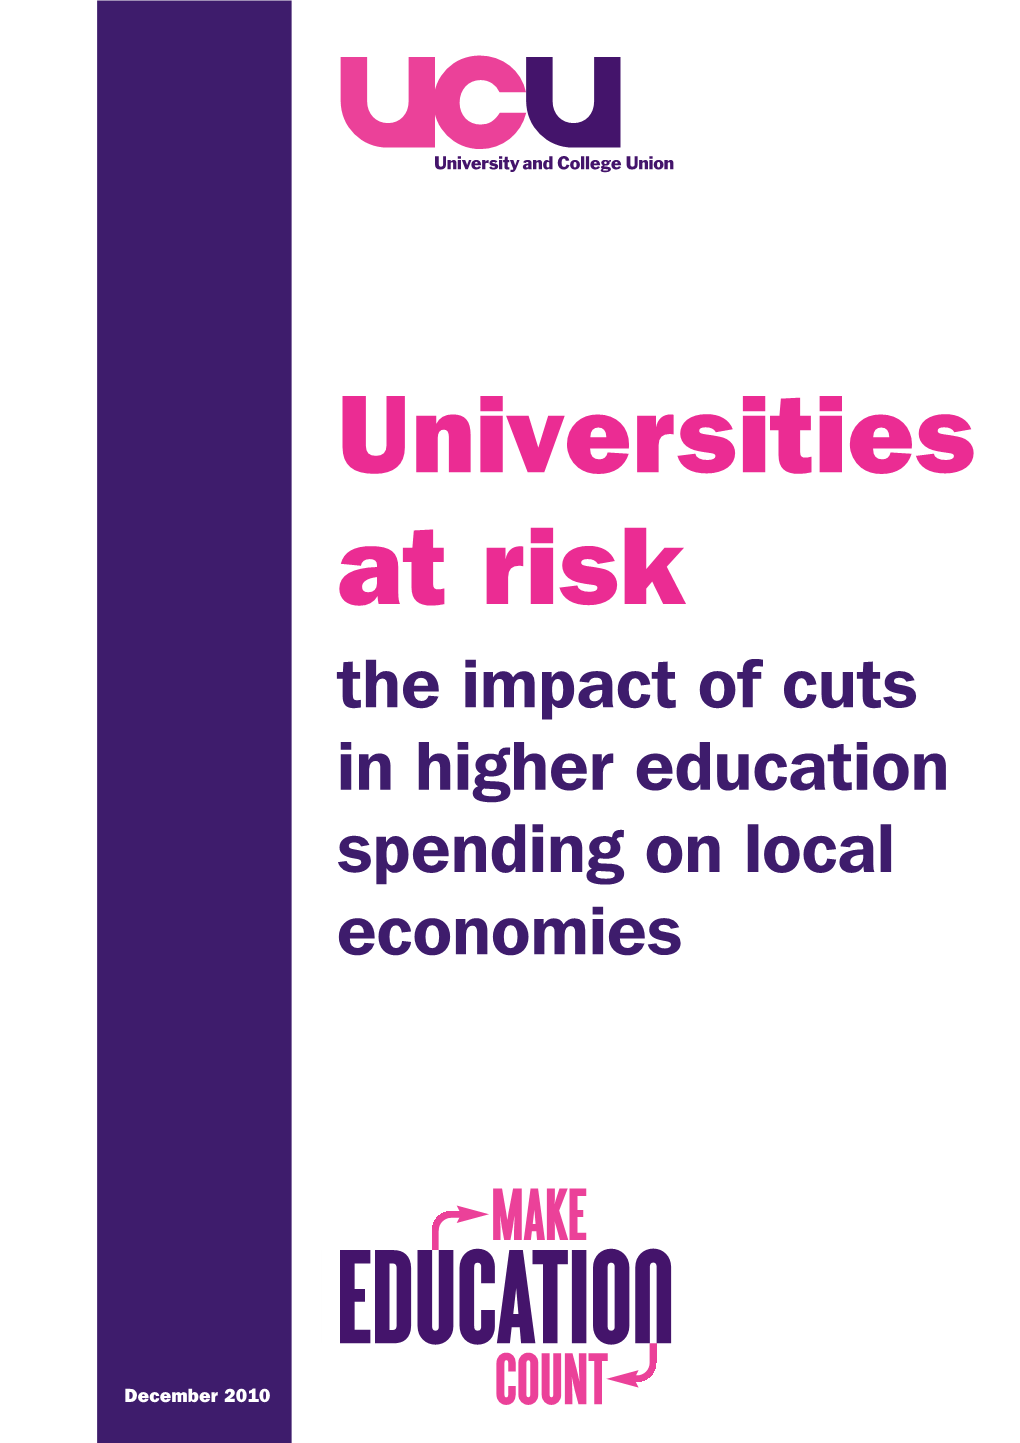 UCU Report Universities at Risk:Layout 1 6/12/10 13:21 Page 1